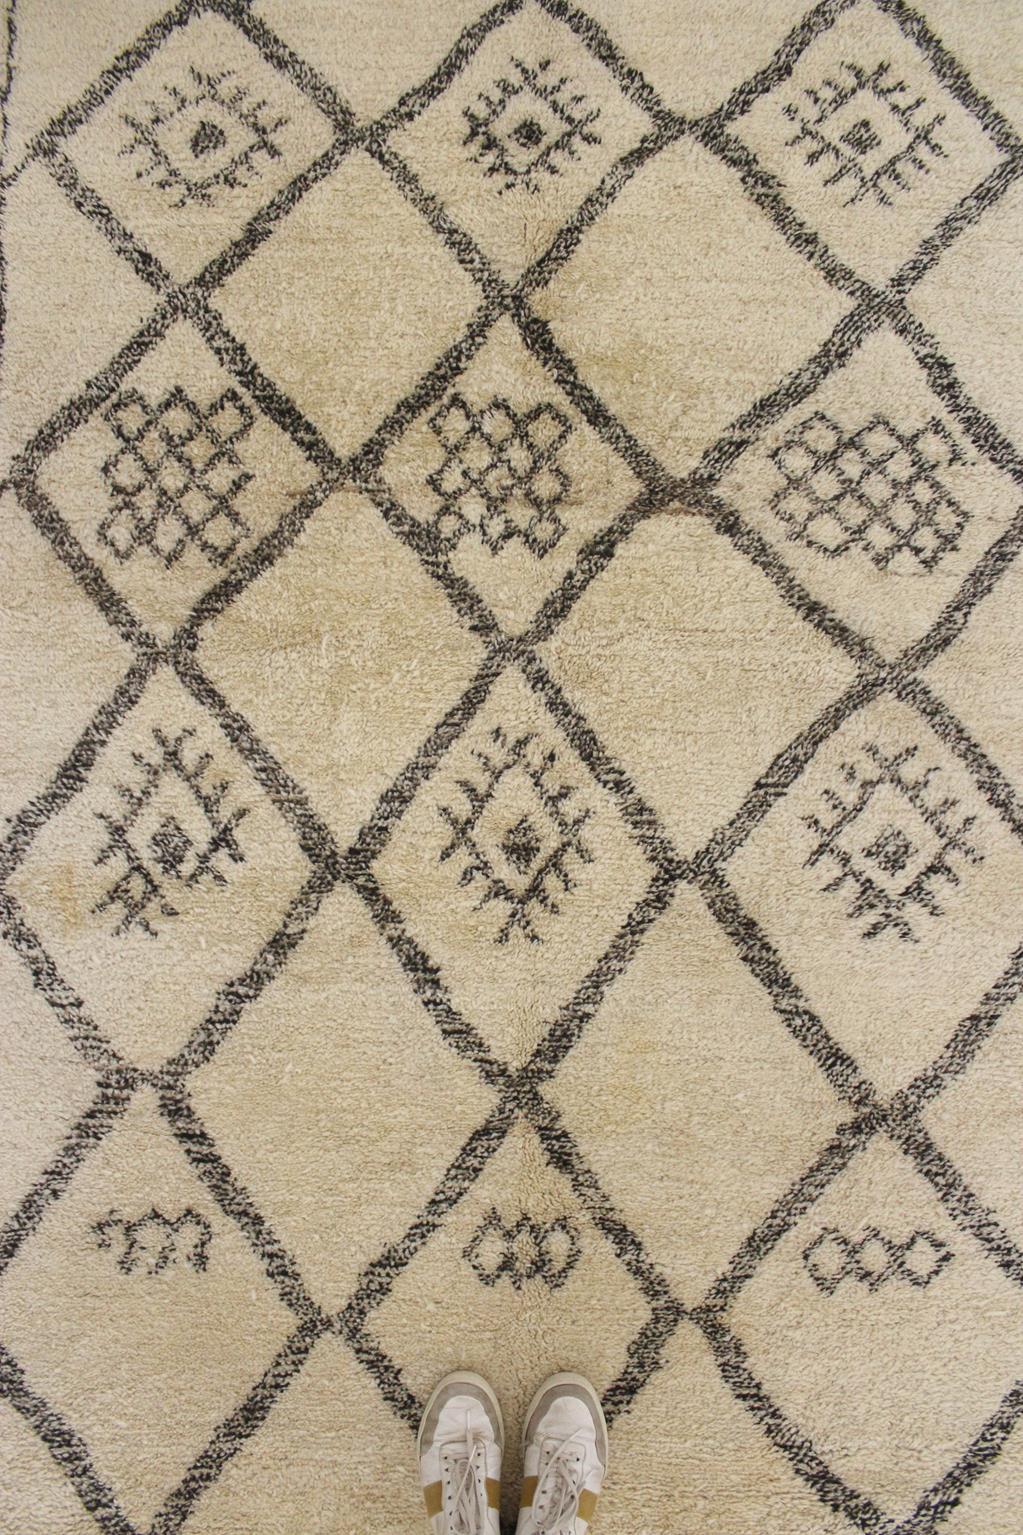 Hand-Woven Vintage Moroccan Beni Ourain rug - Beige/black - 5.9x9.5feet / 180x290cm For Sale